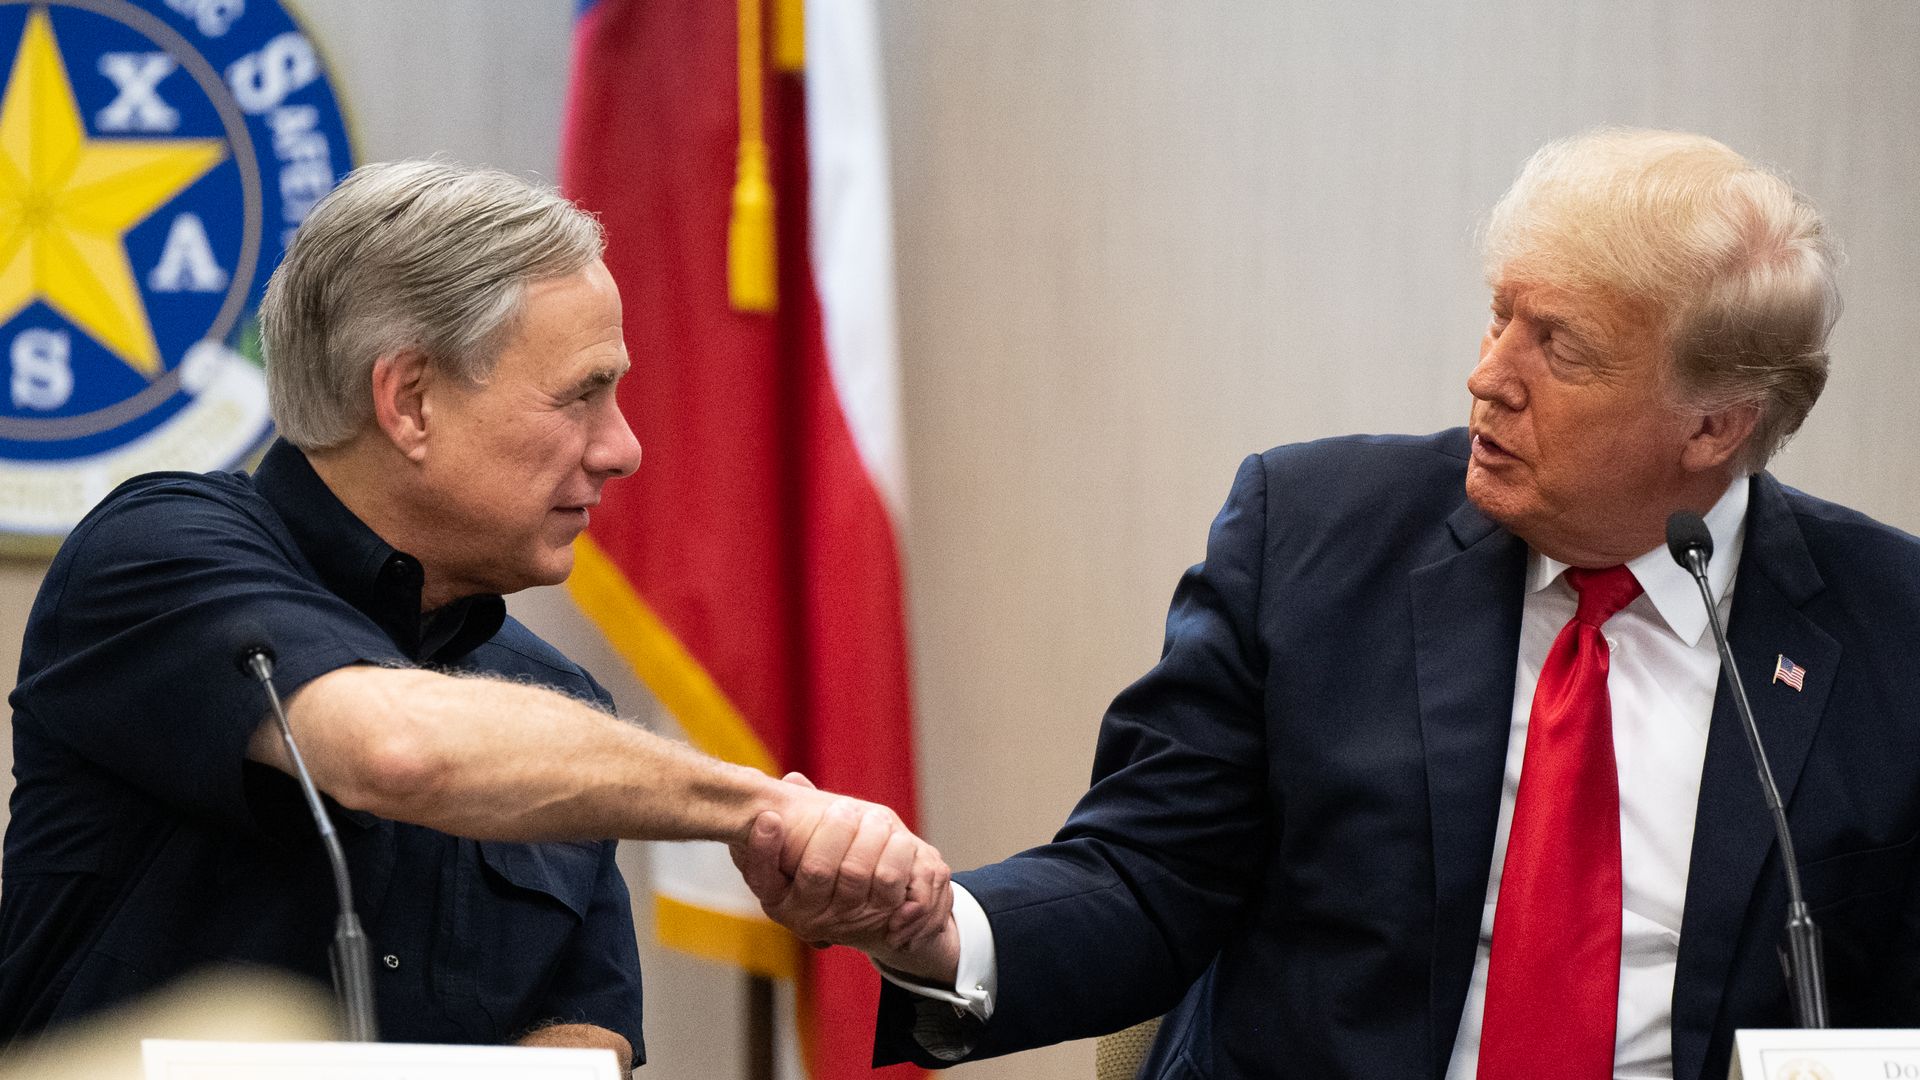 Former President Trump is seen shaking hands with Texas Gov. Greg Abbott during a visit to the U.S.-Mexico border.